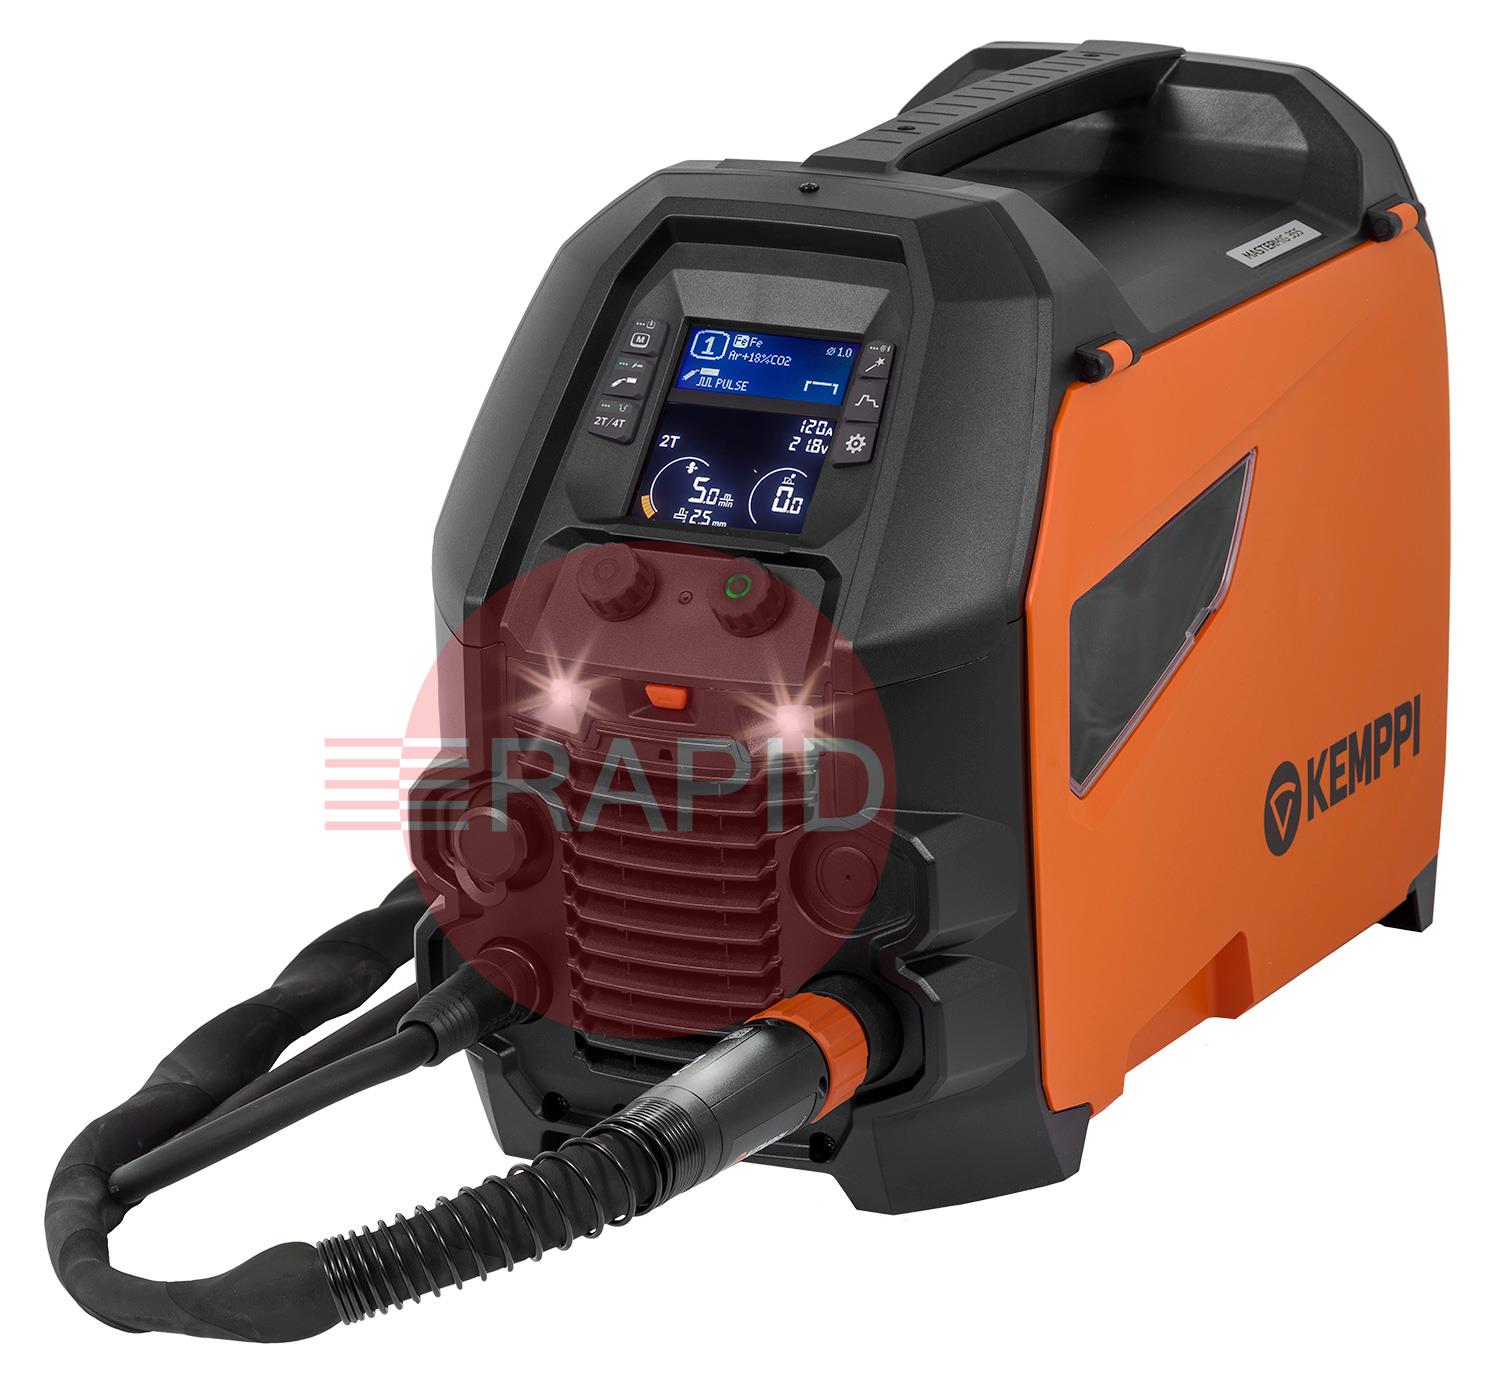 P506GXE4  Kemppi Master M 355G Pulse MIG Welder Air Cooled Package, with GXe 405G 5.0m Torch - 400v, 3ph